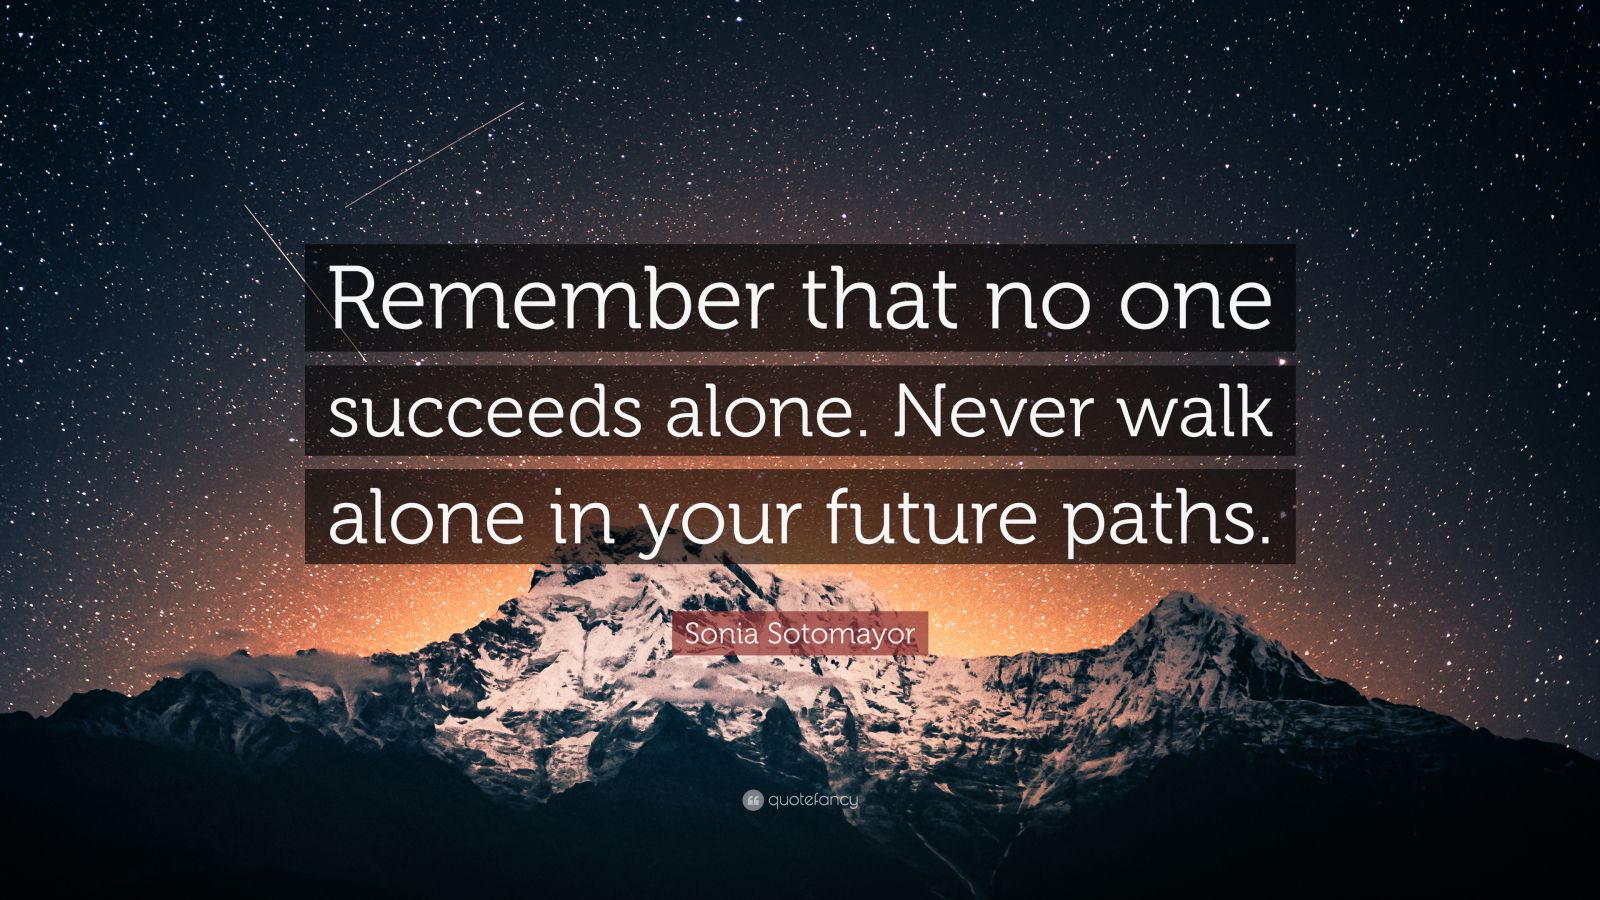 2283324 Sonia Sotomayor Quote Remember that no one succeeds alone Never